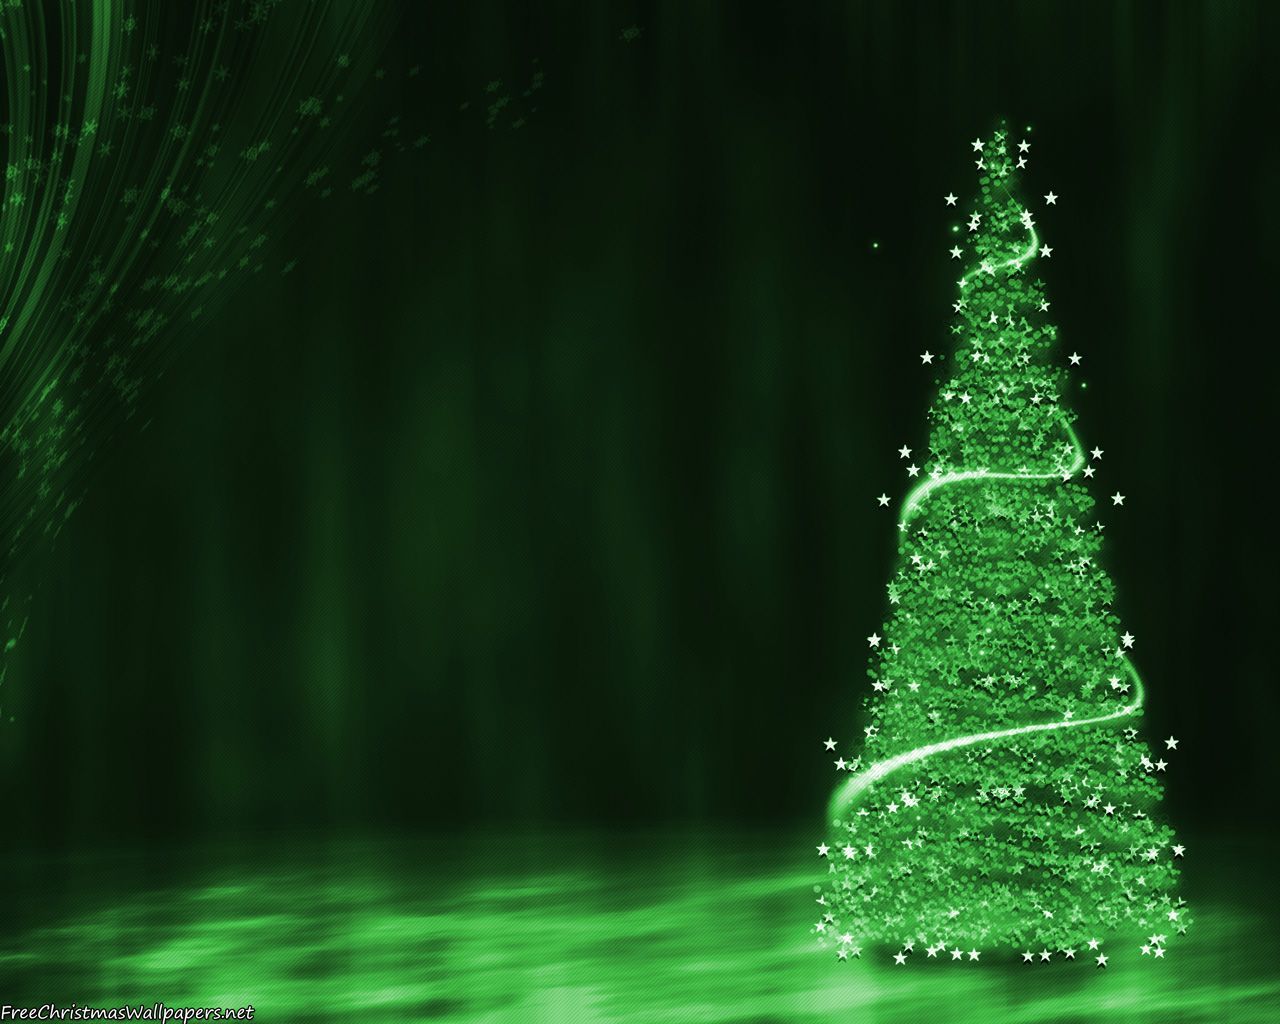 Green Christmas Tree Background. Christmas wallpaper background, Christmas tree background, Christmas background